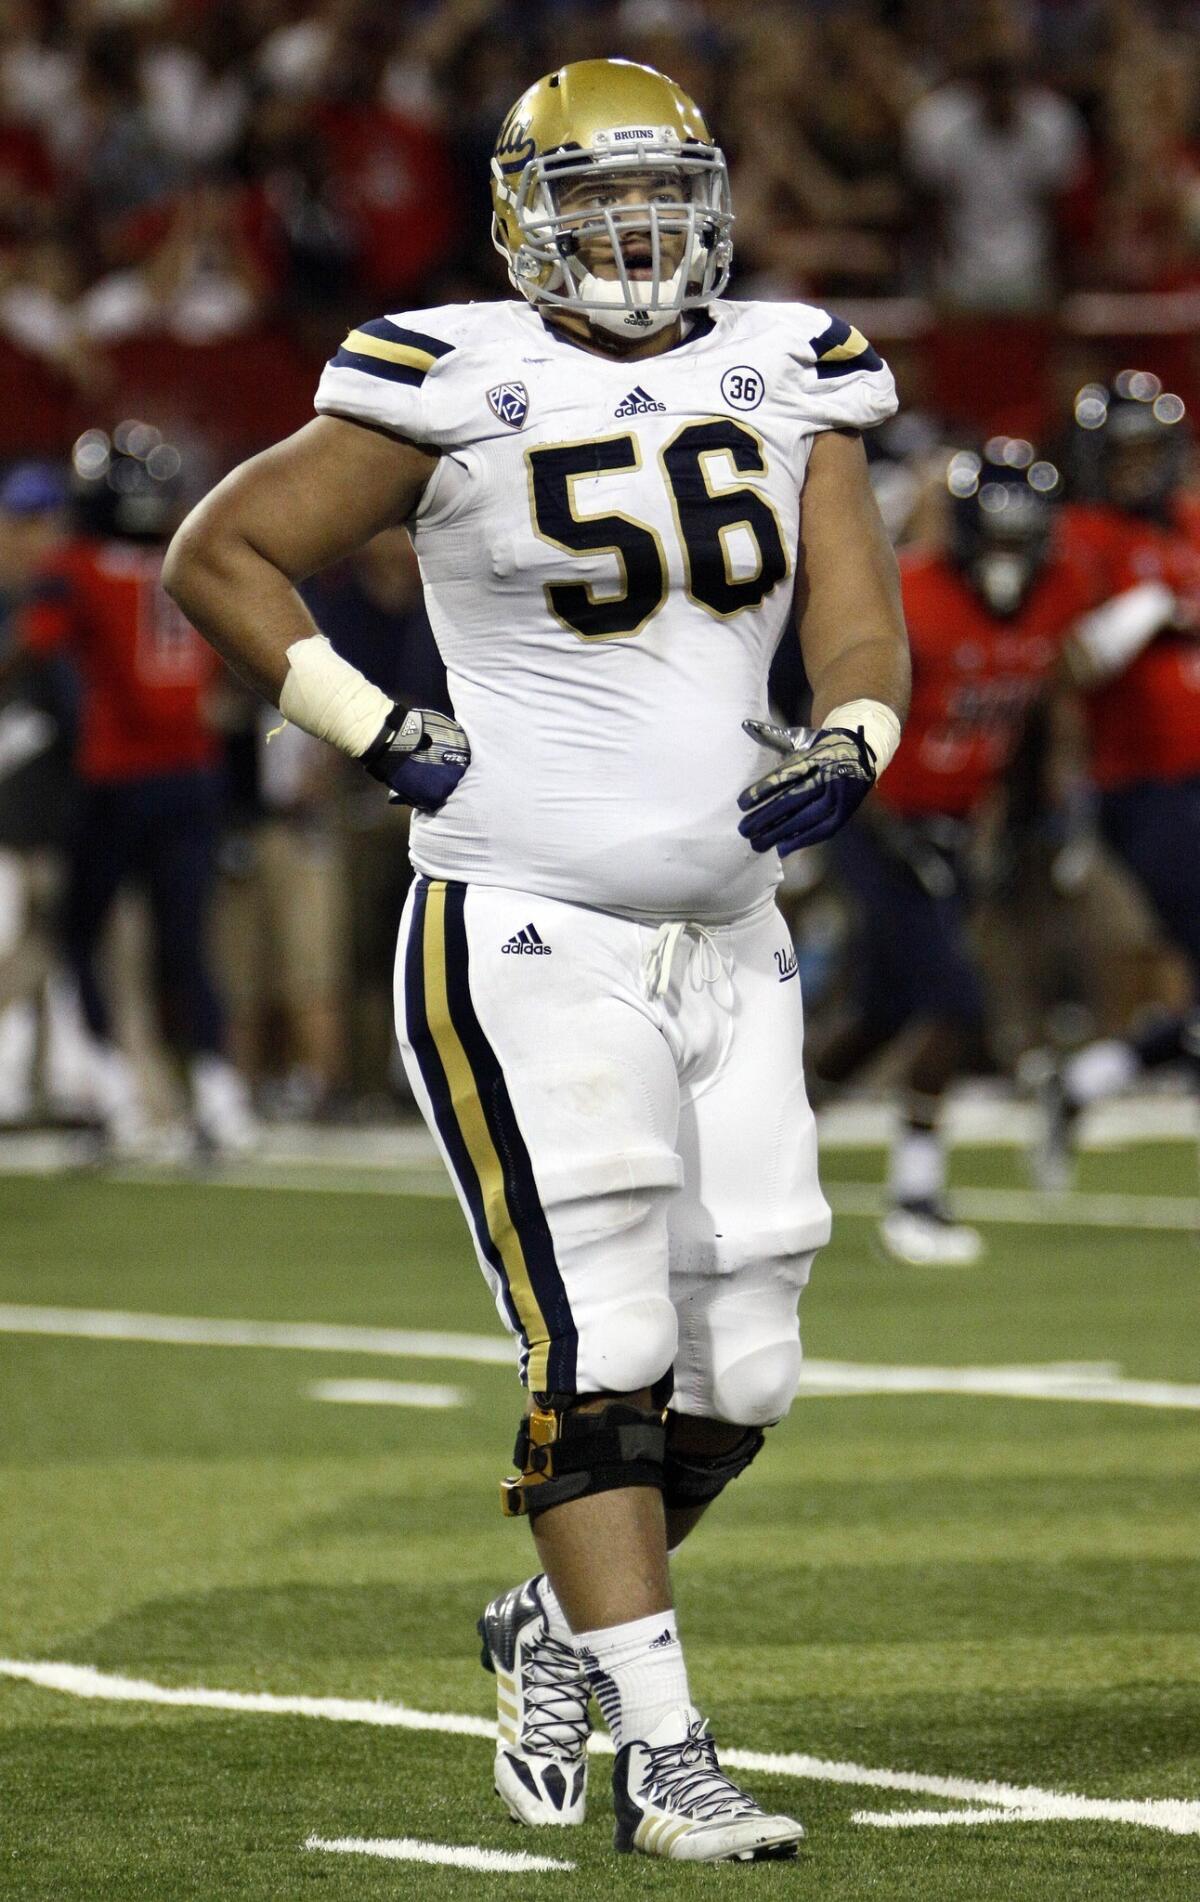 UCLA's Xavier Su'a-Filo has developed into arguably the best offensive lineman in the Pac-12.